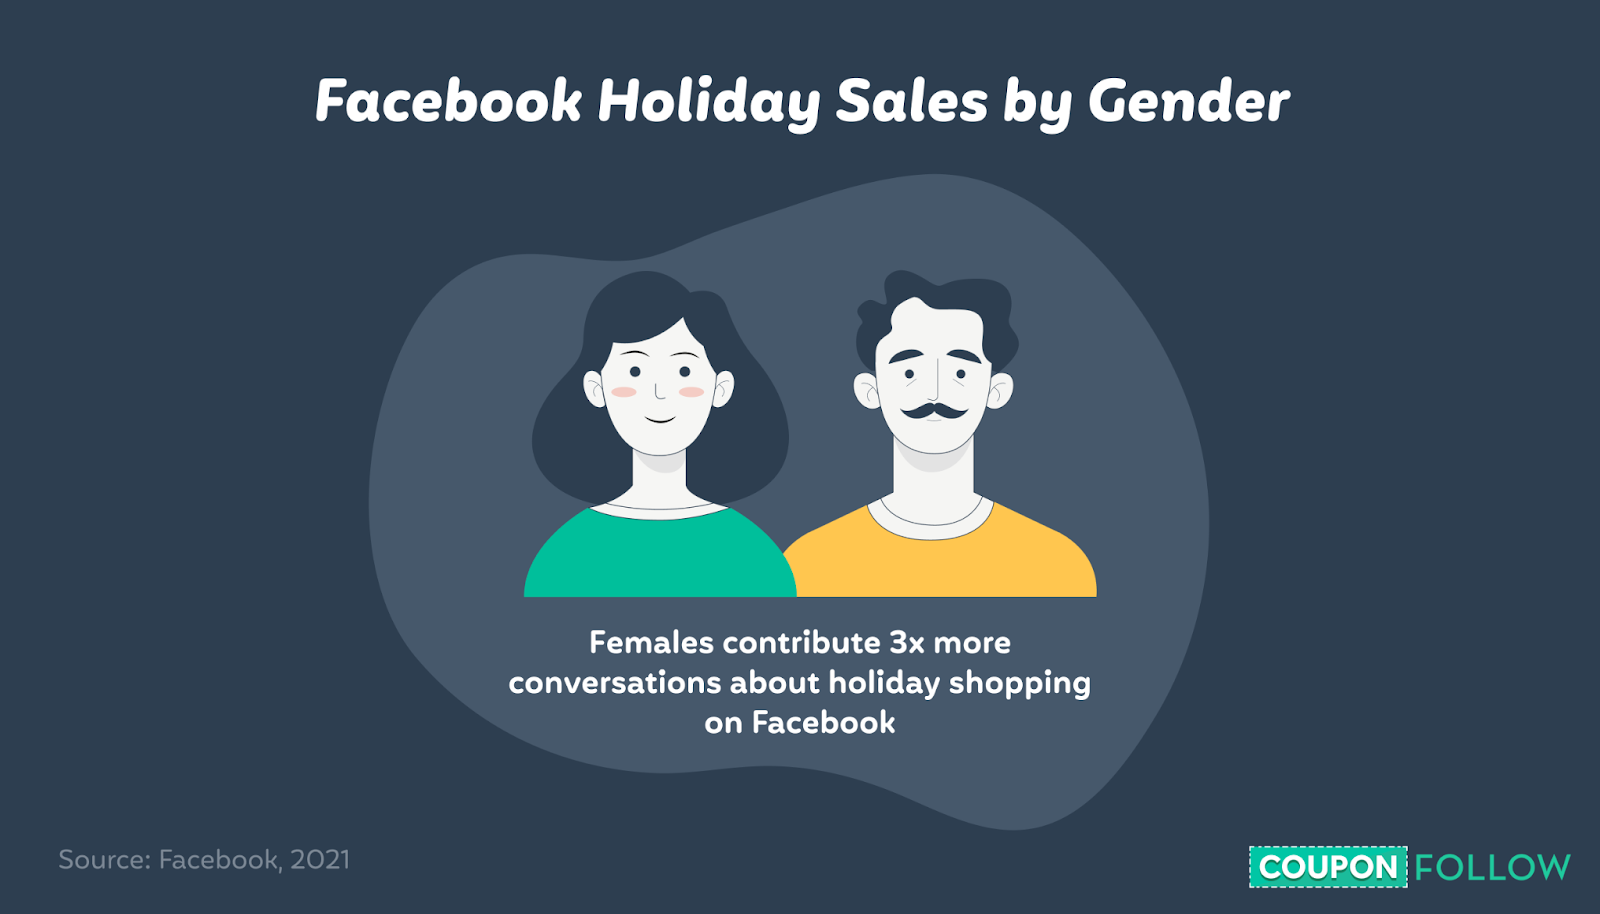 illustration showing holiday shopping conversation contributions of women vs men